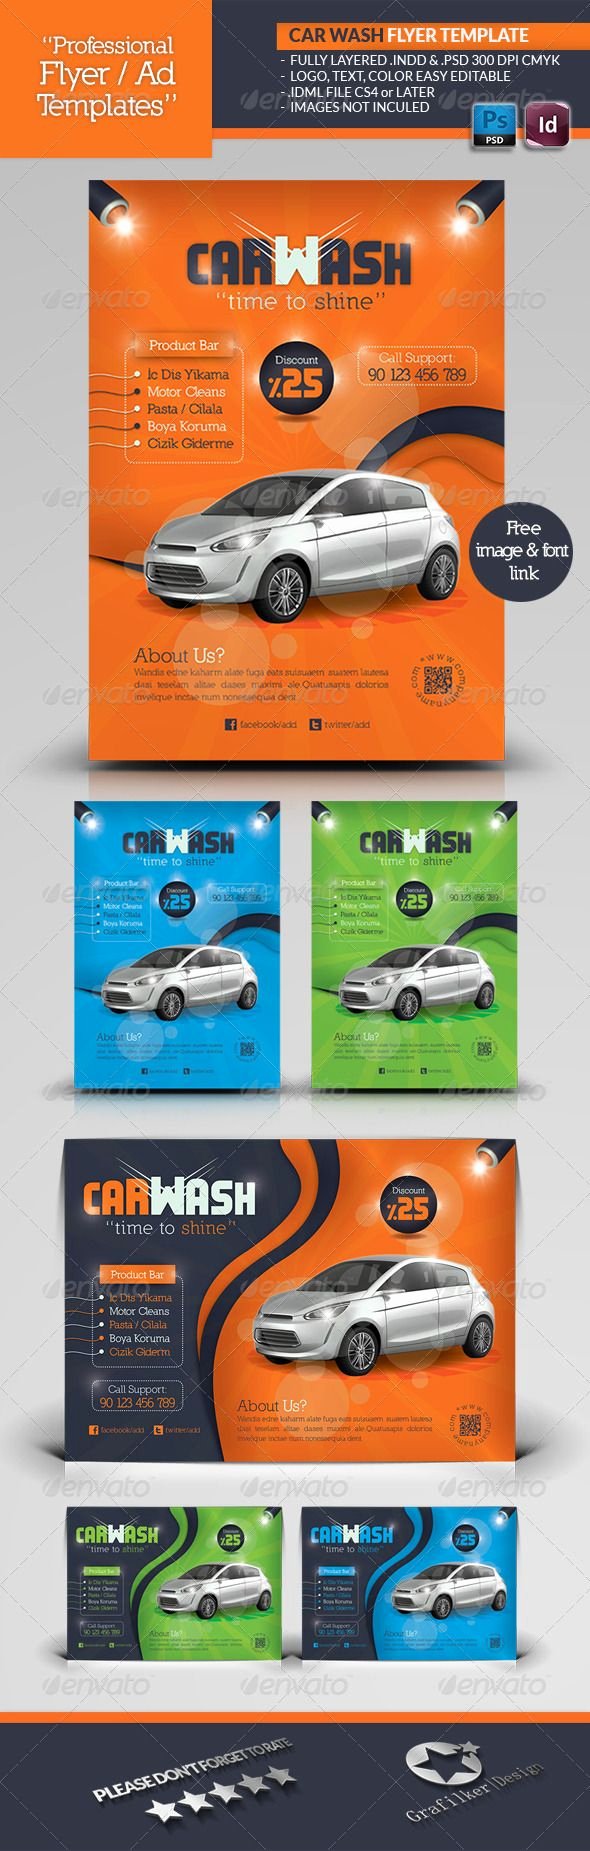 Car Wash Flyer Template Best Of Car Wash Flyer Template